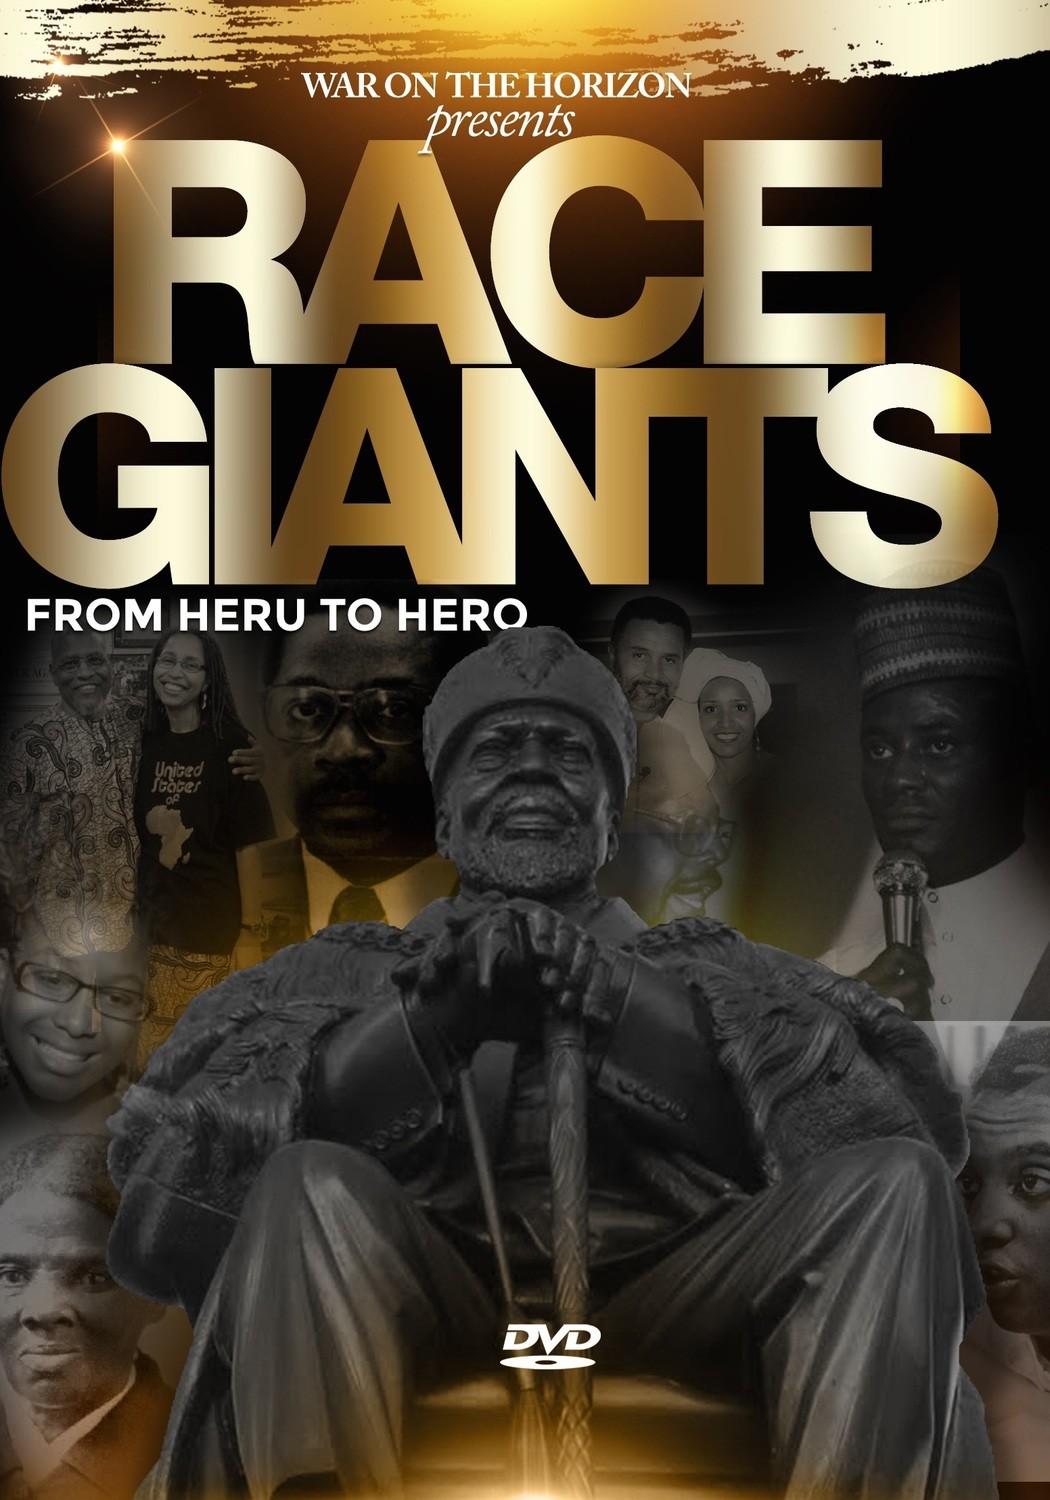 Race Giants - From Heru to Hero - .mp4 Electronic Email Version